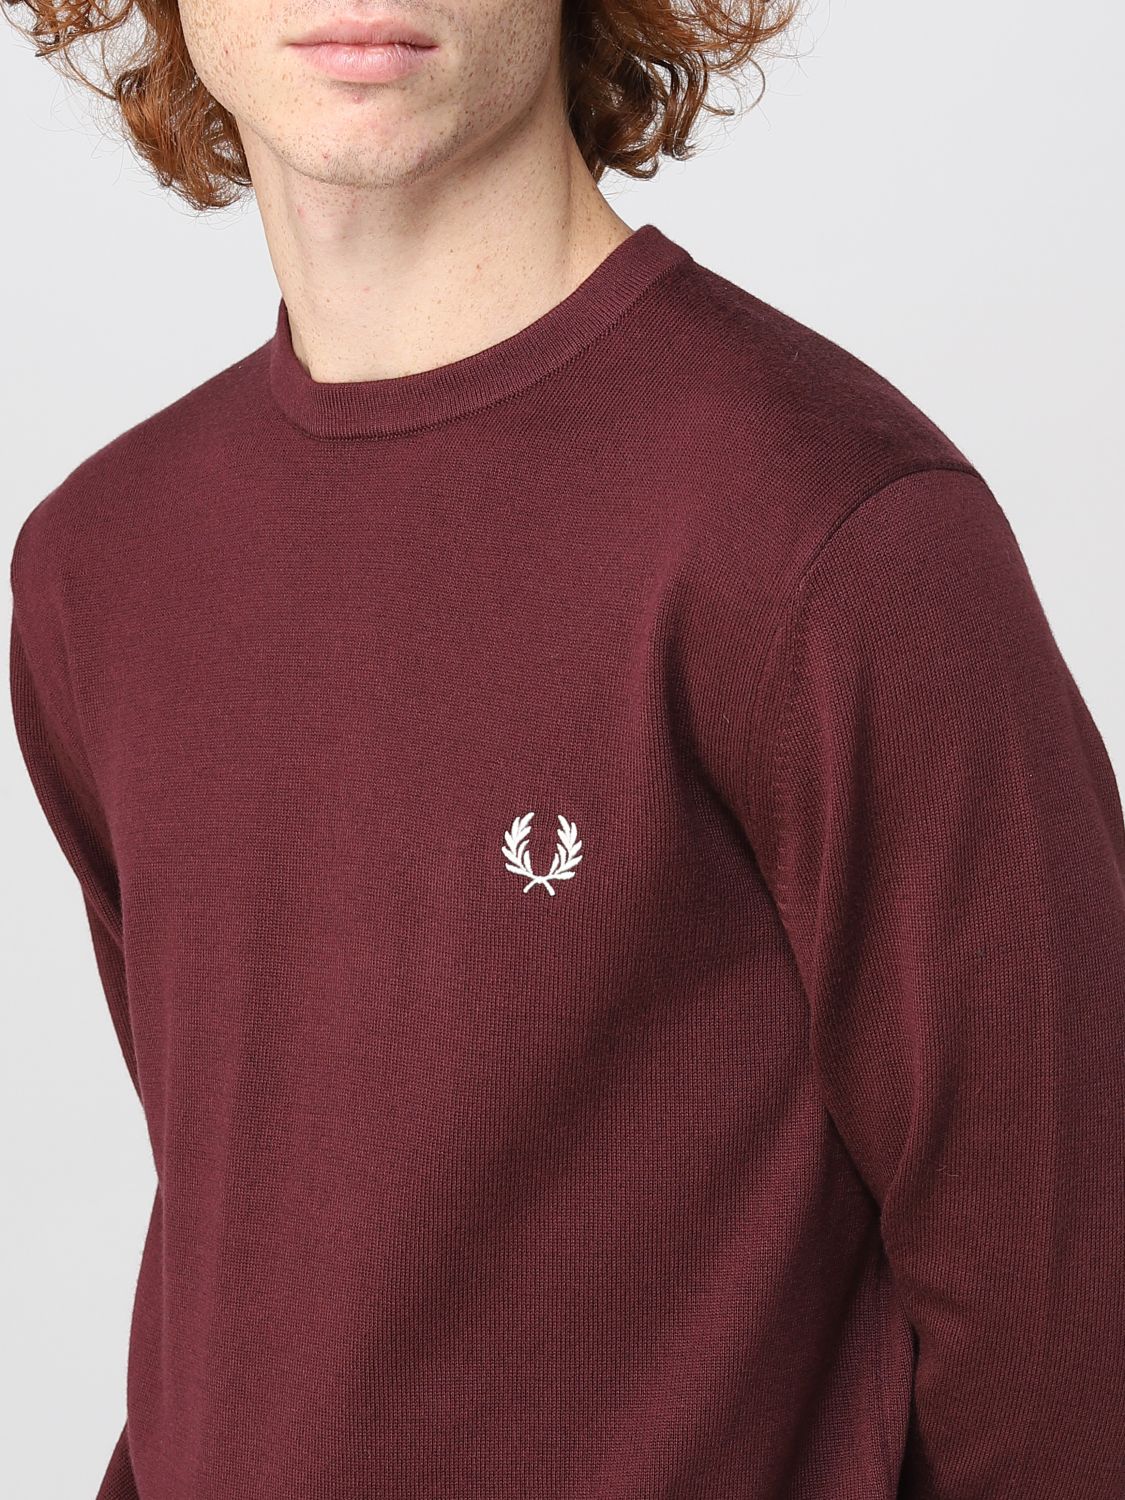 Pullover Fred Perry: Fred Perry Herren Pullover burgunderrot 3